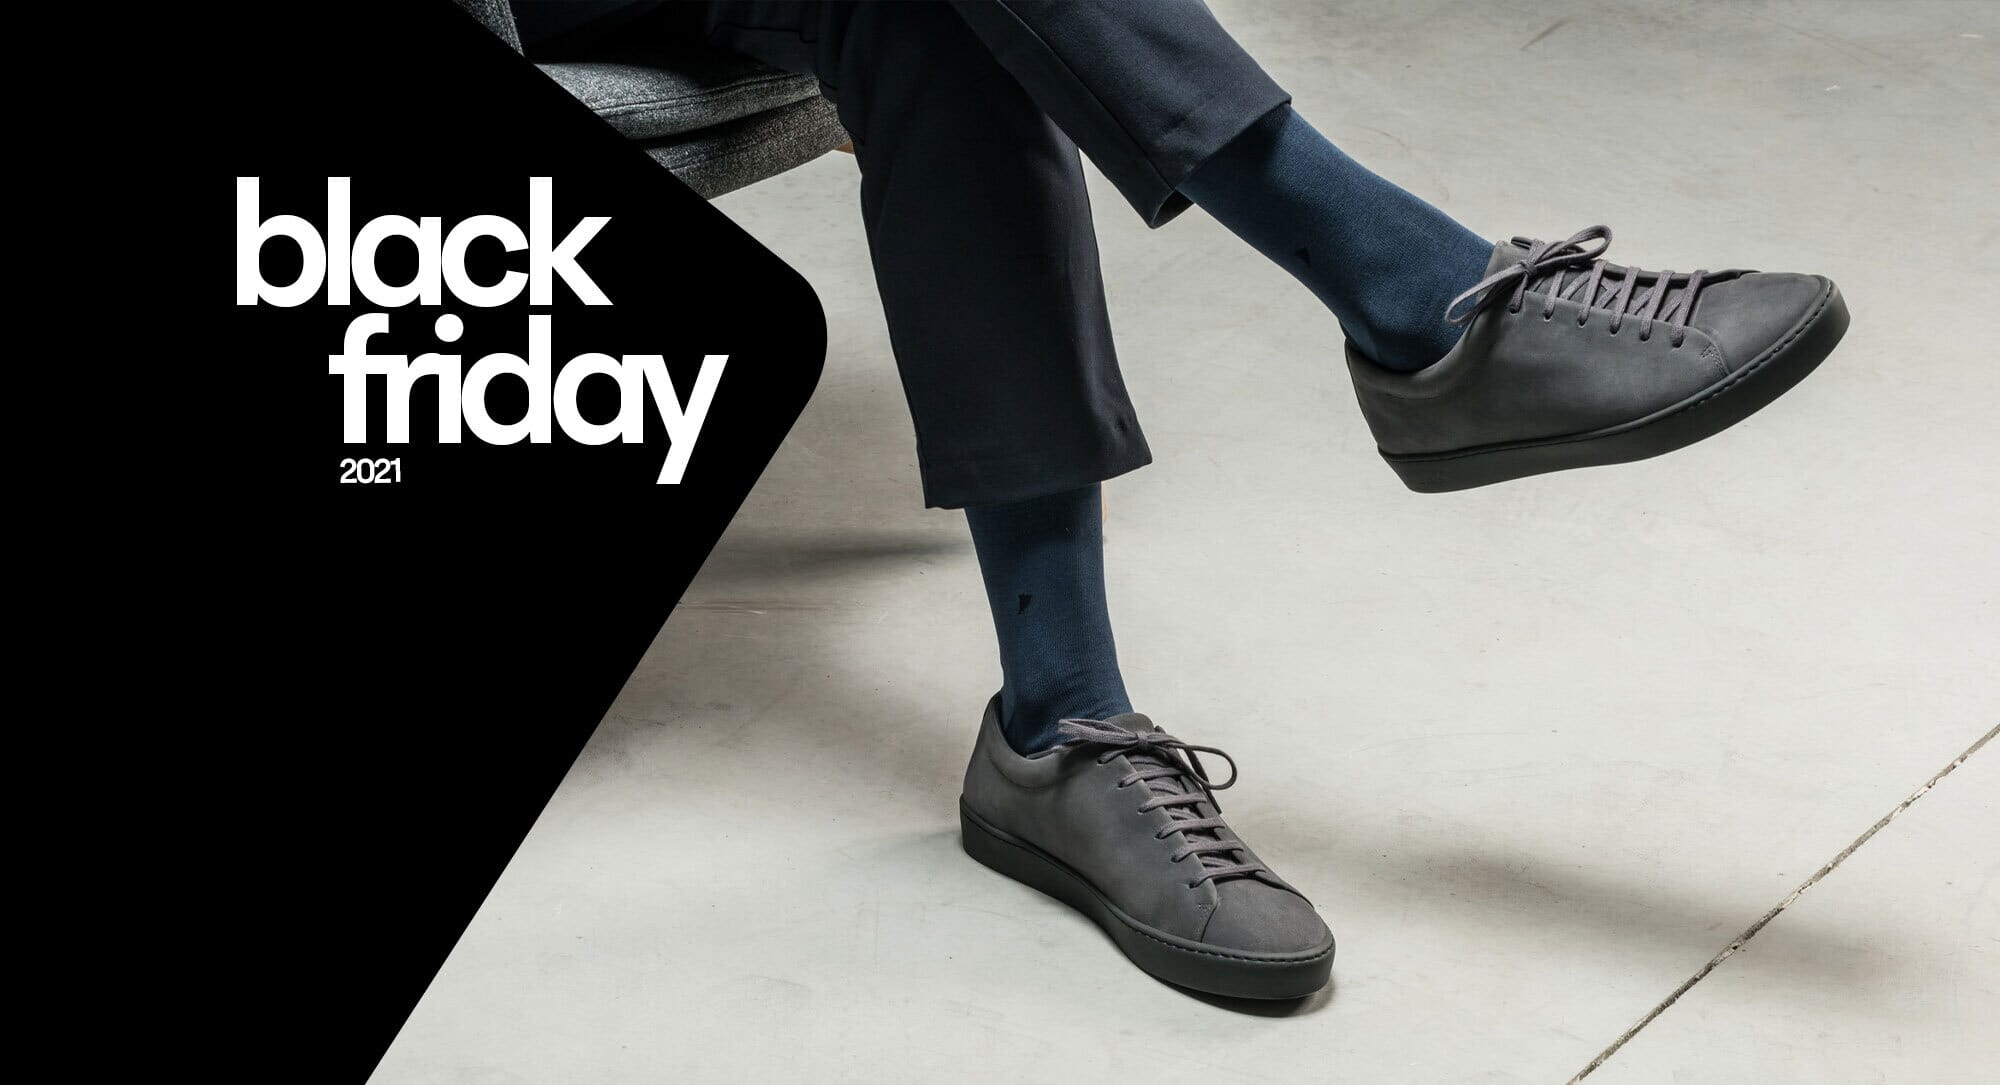 5 of our favourite sneakers from the JAK Black Friday sale | OPUMO